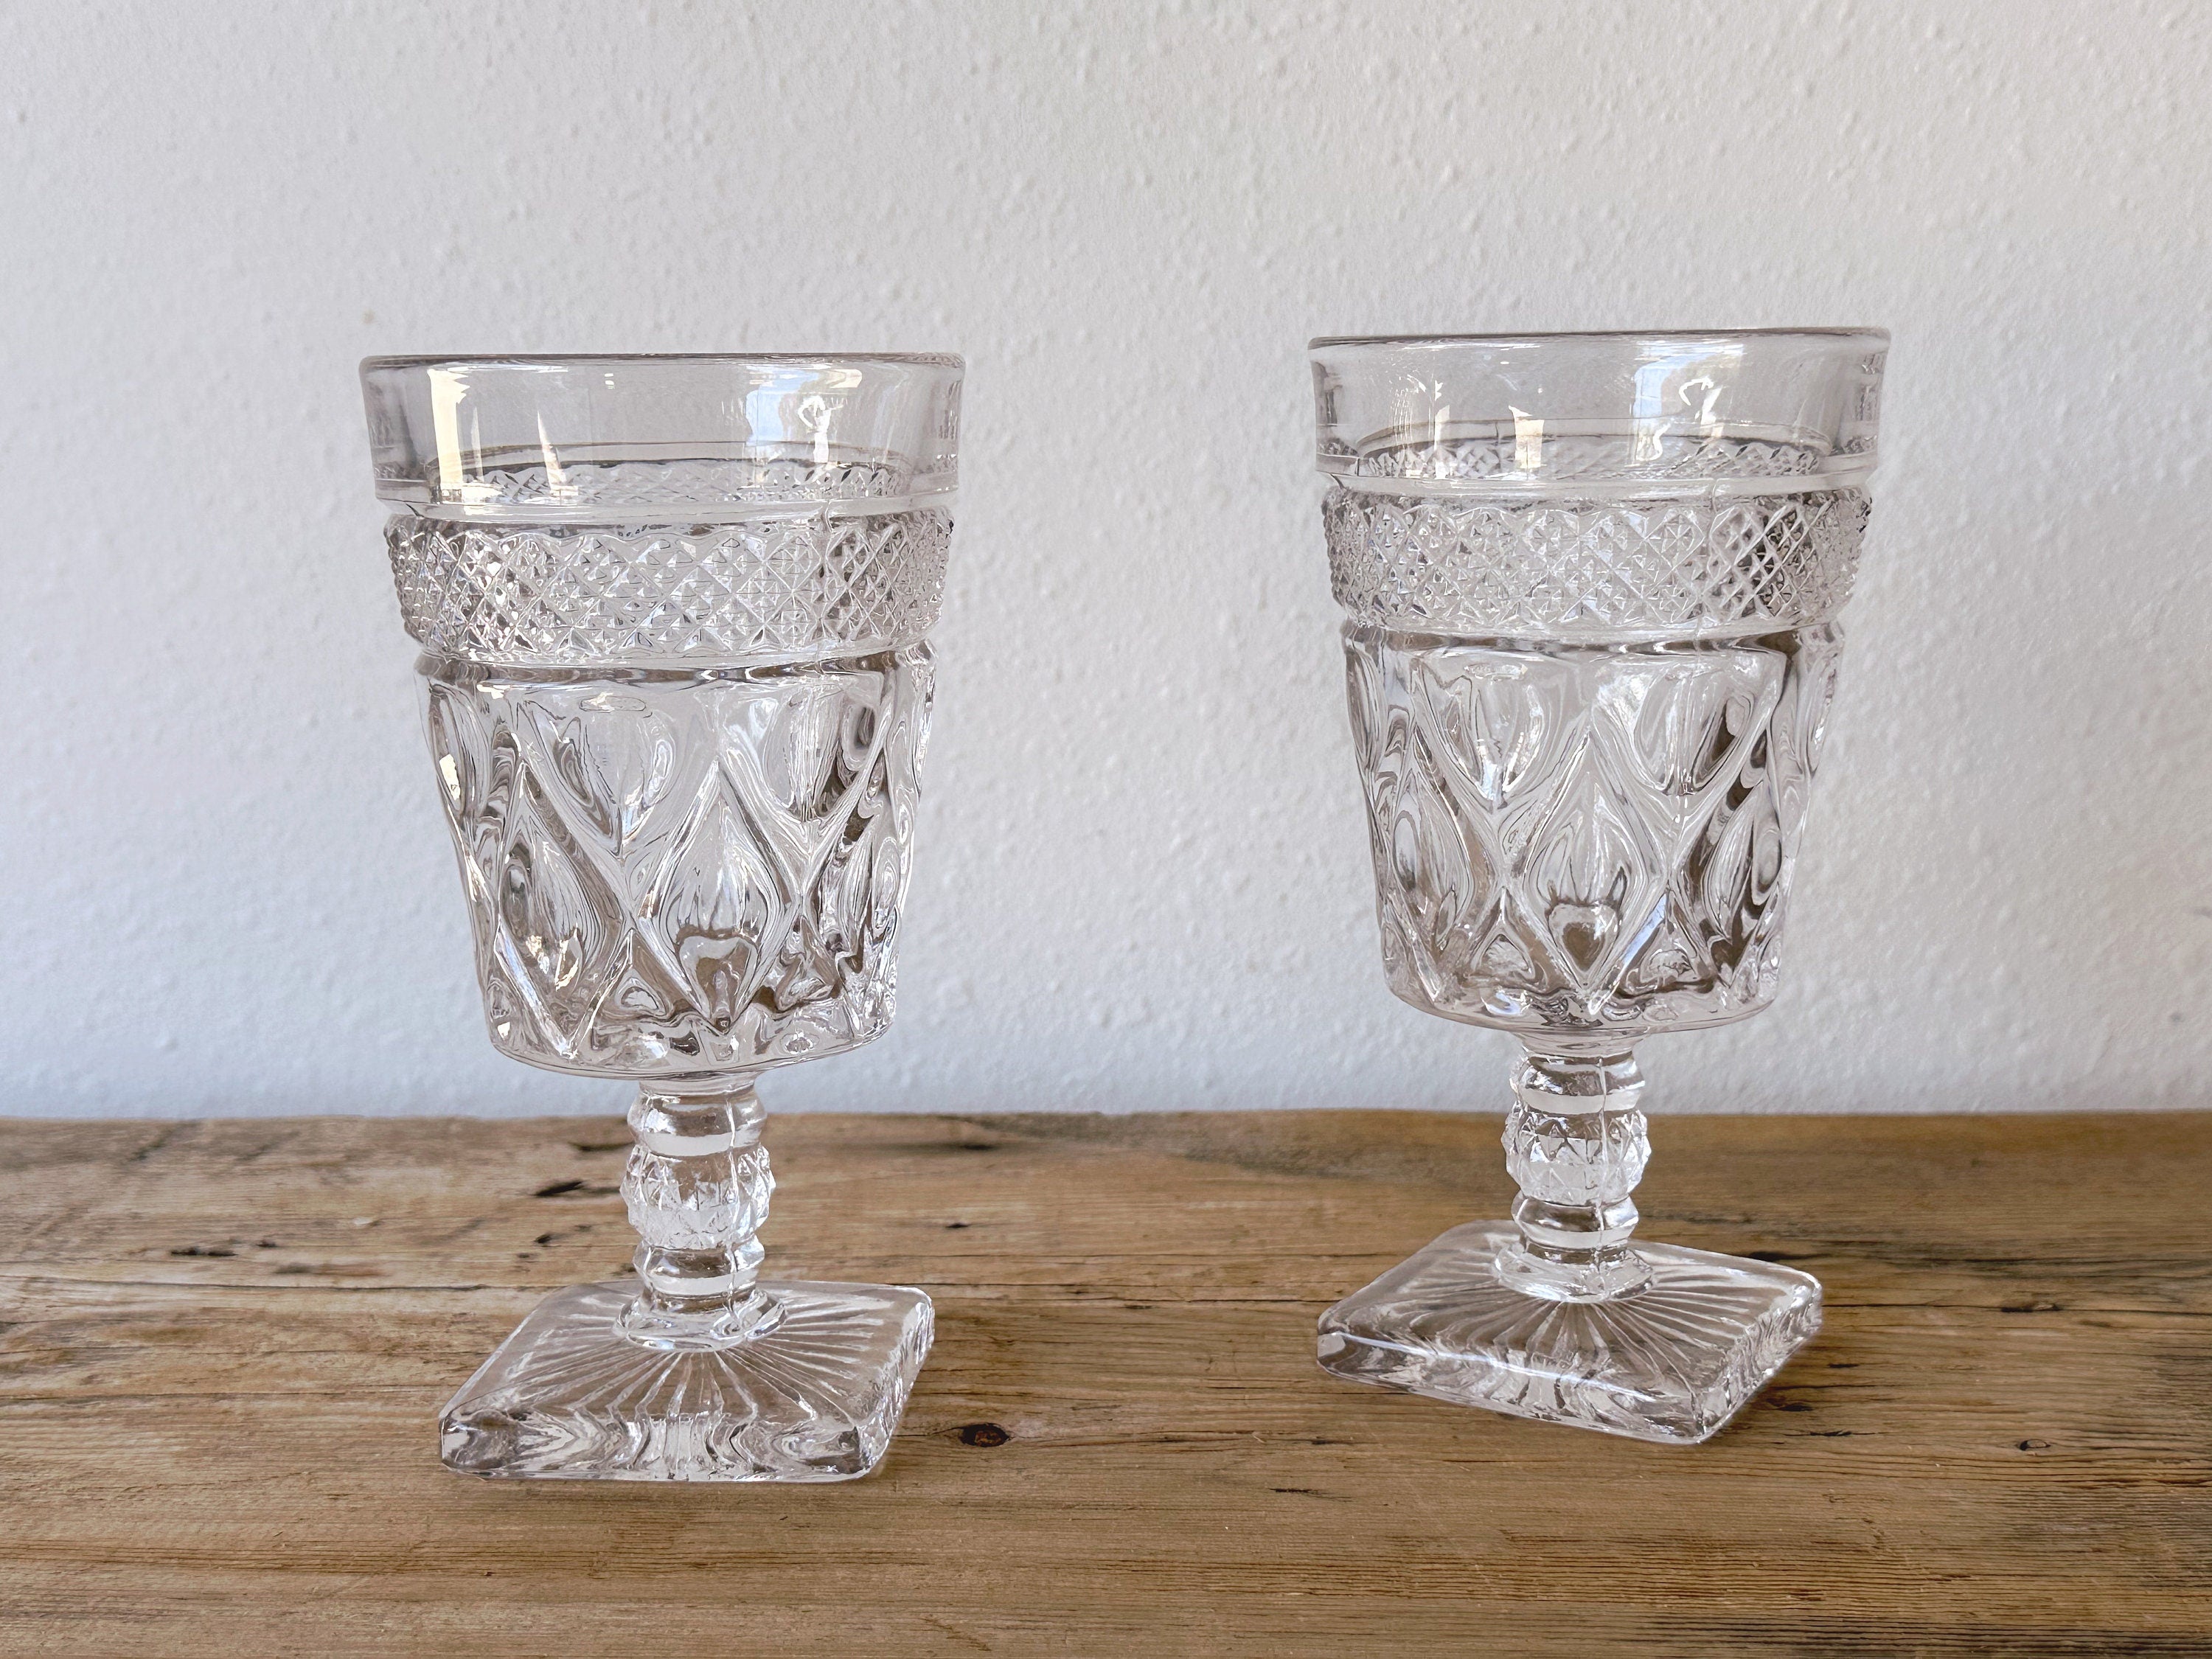 Pair of Tall Vintage Pressed Clear Glass Wine Goblets | Mid Century Juice and Water Glasses | Glassware Barware Housewarming Gift